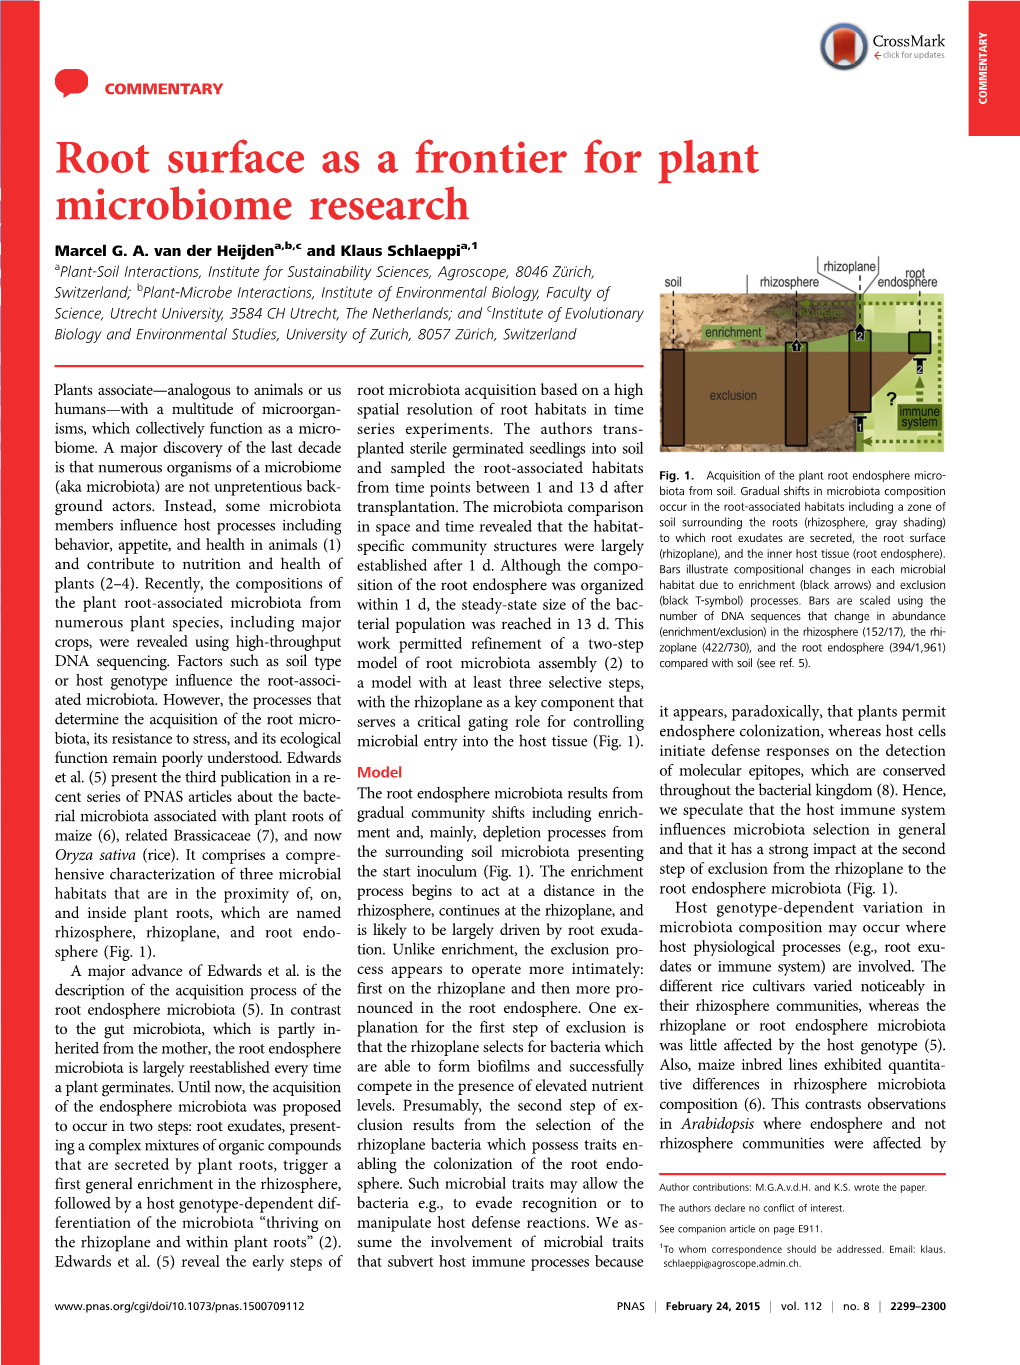 Root Surface As a Frontier for Plant Microbiome Research